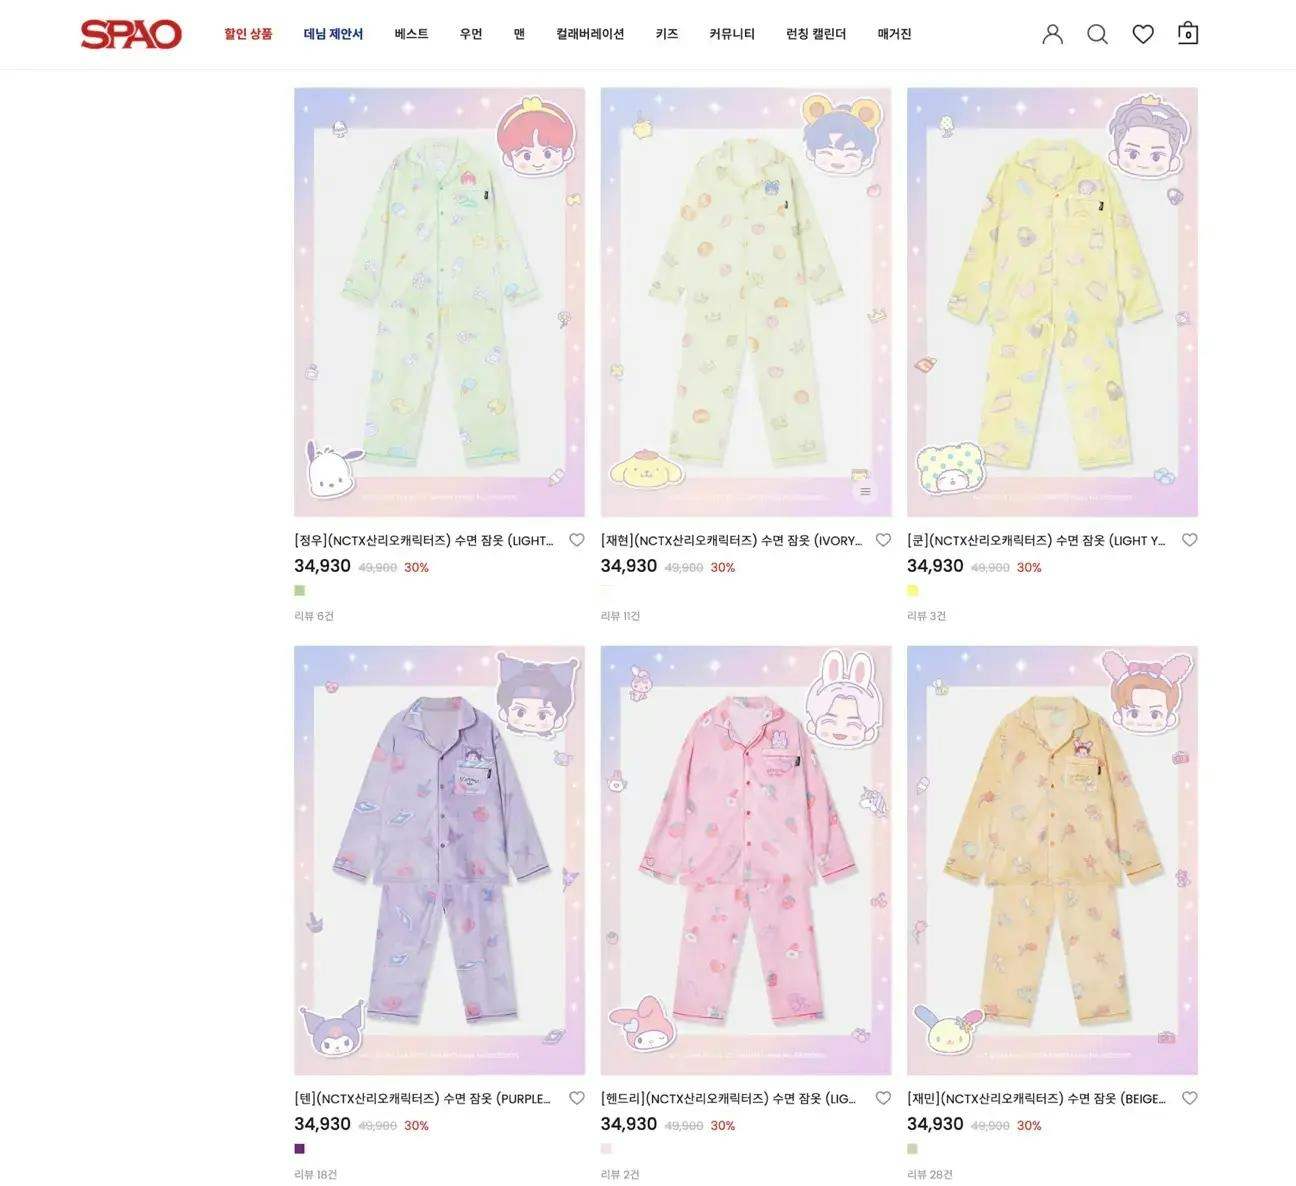 NCT x Sanrio merch that are available as cute pajamas set